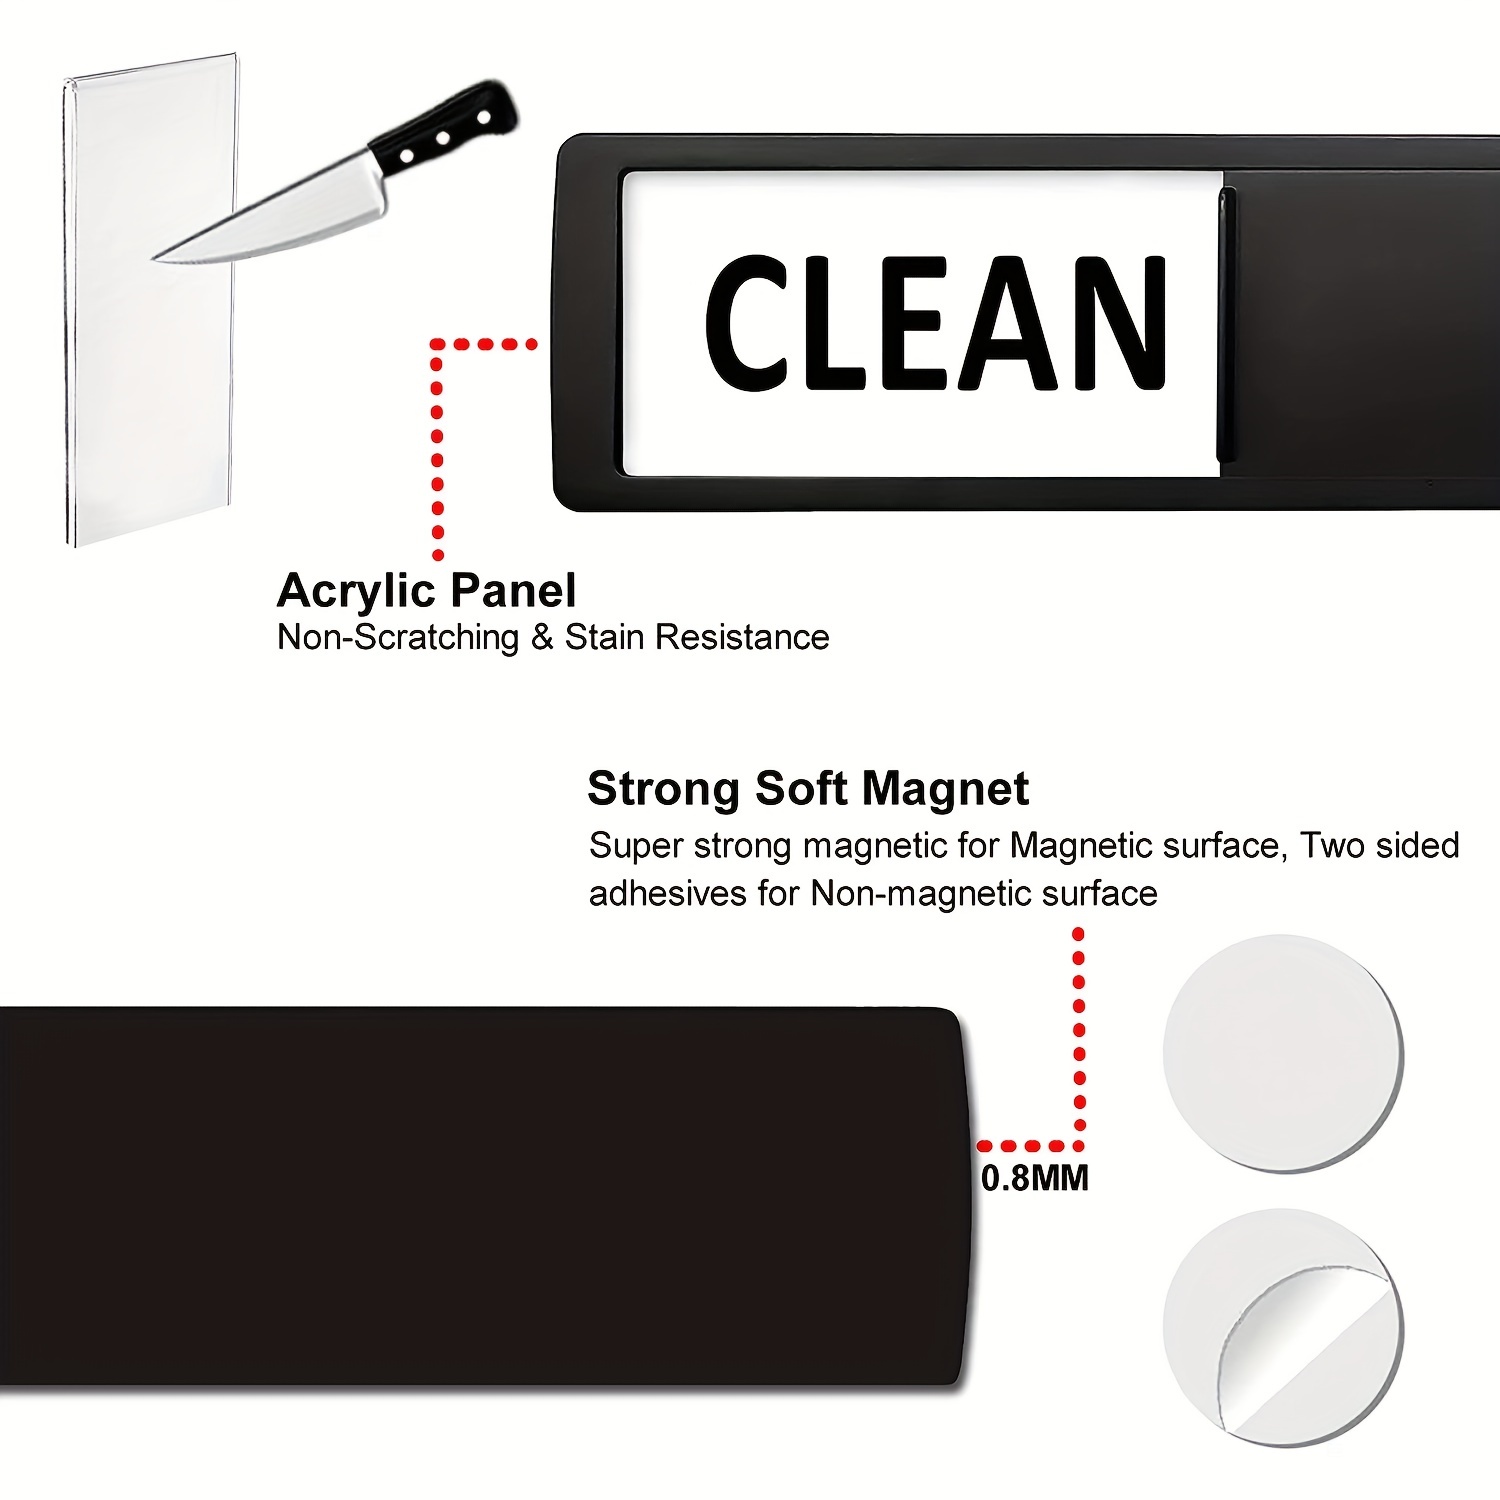 1pc Dishwasher Magnet Clean Dirty Sign, Universal Double-Sided Clean Dirty  Magnet For Dishwasher, Refrigerator Or Washing Machine, Strong Magnetic No  Scratches